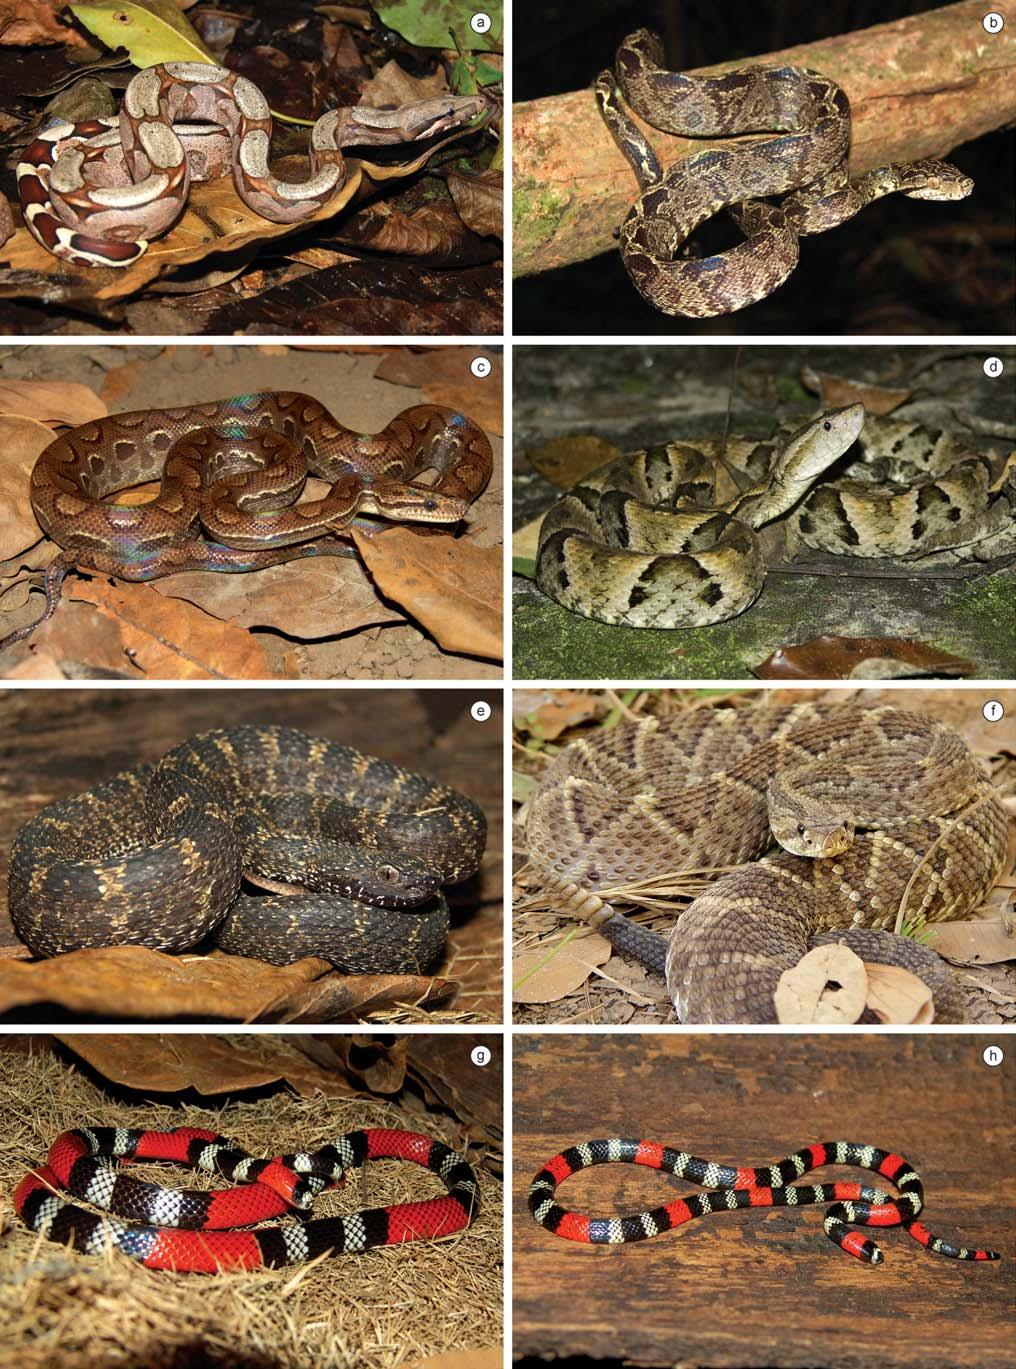 Biota Neotrop., vol. 10, no. 3 247 Amphibians and reptiles from a highly diverse area of the Caatinga domain Figure 13. Reptile species found in the region of CPI.